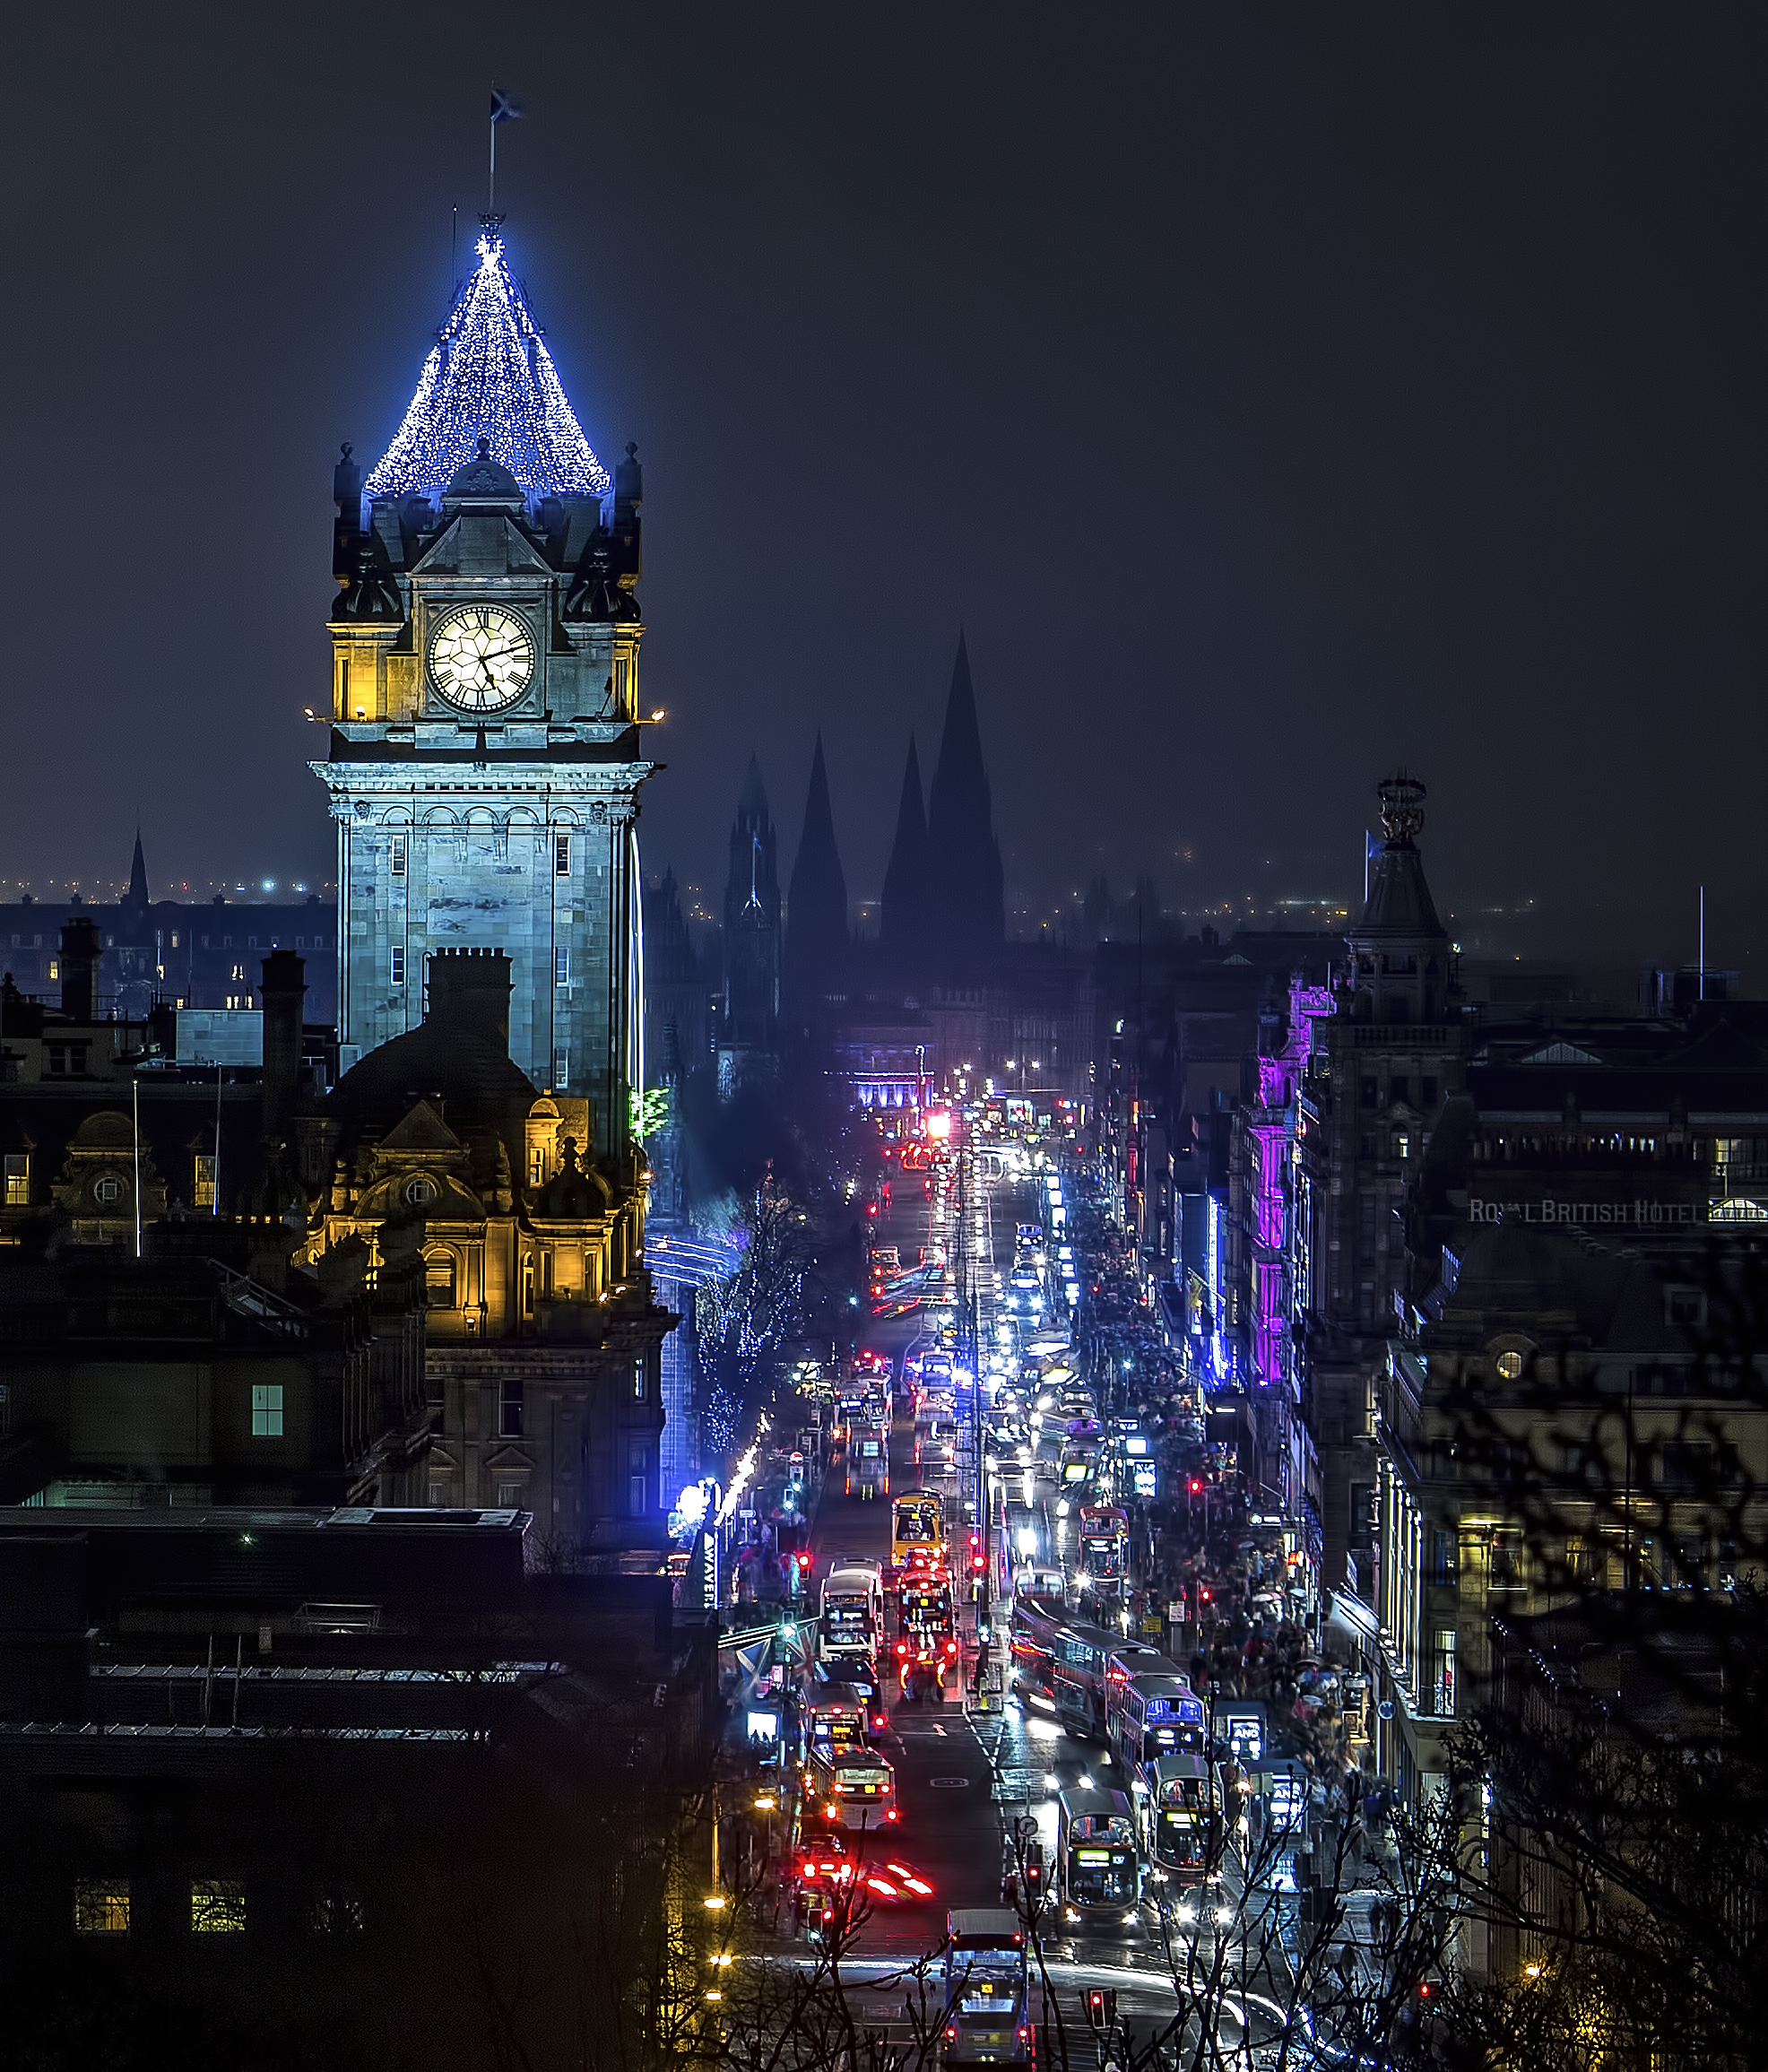 Princes Street and the Balmoral Hotel from Calton Hill